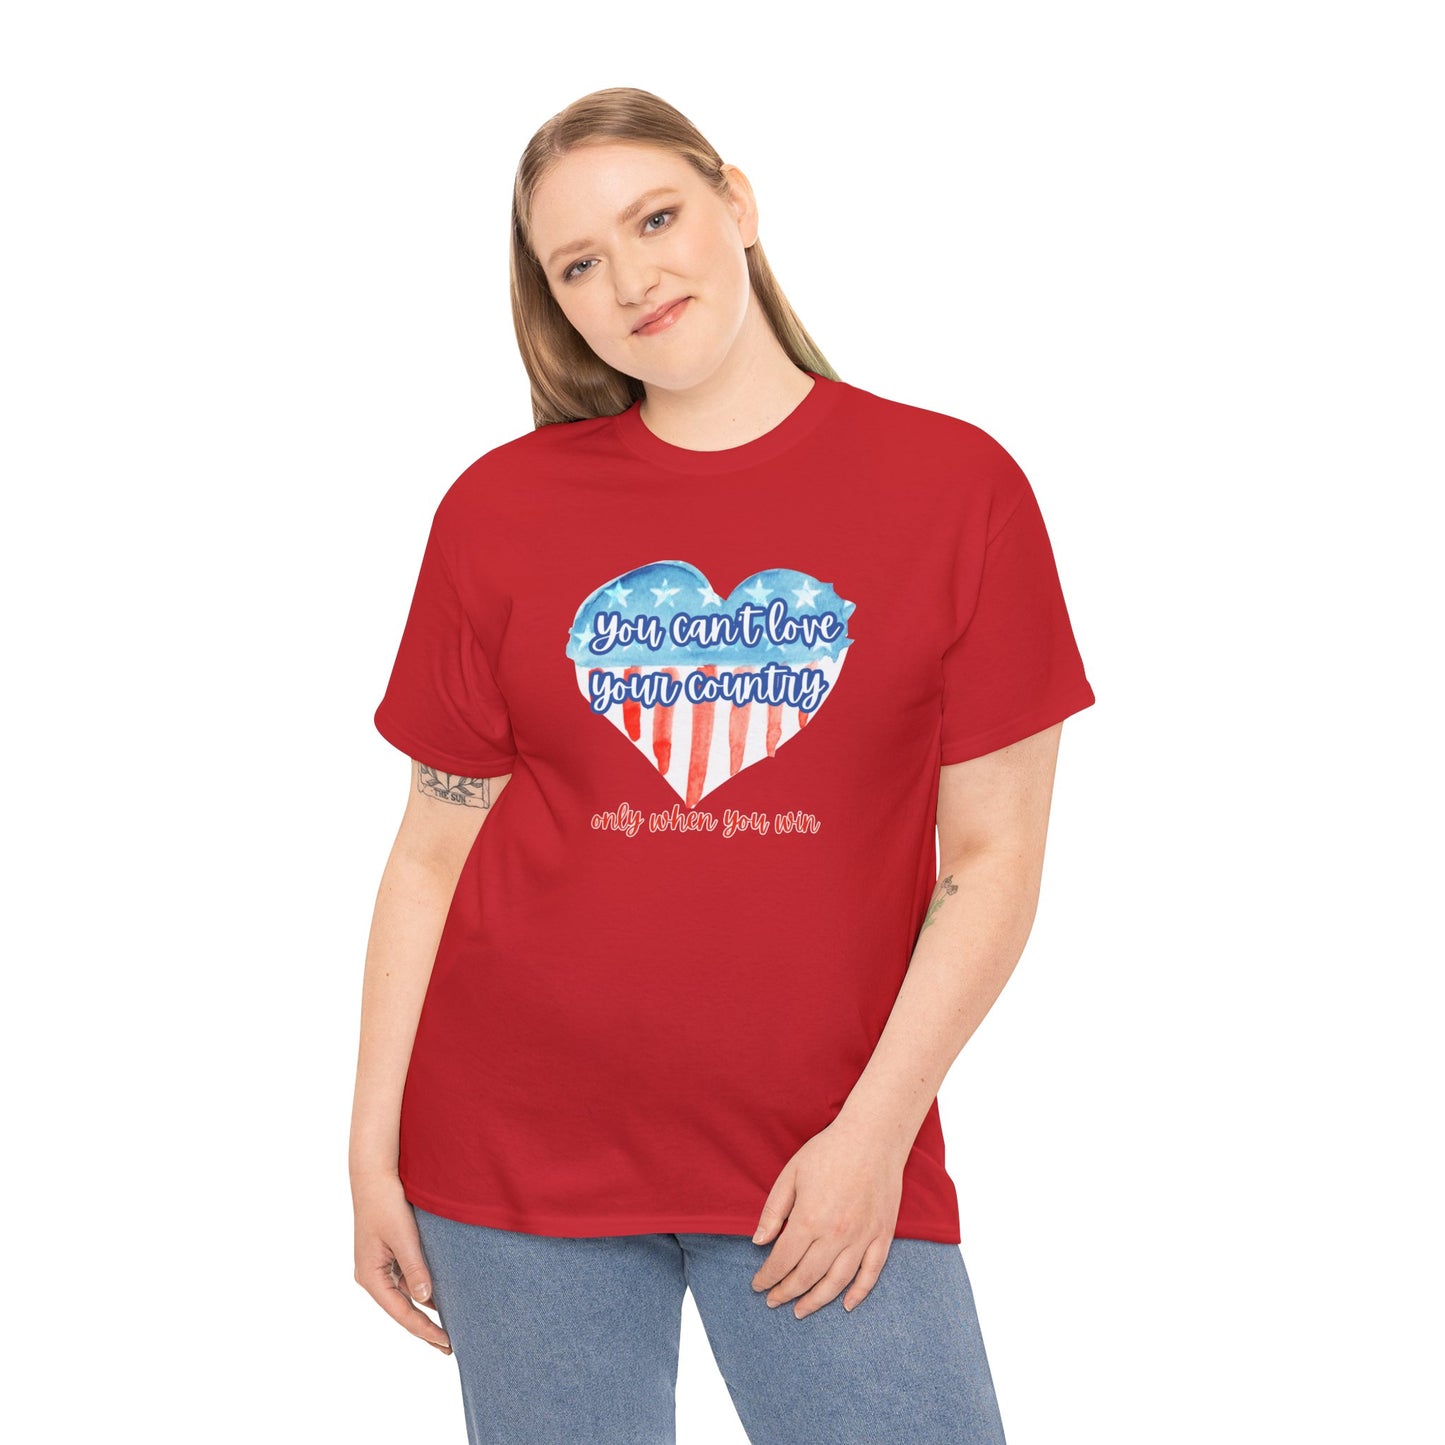 You can't love your country only when you win t-shirt, positive pro Biden, anti Trump, Never Trumper, T-shirt, pro democracy, heart flag